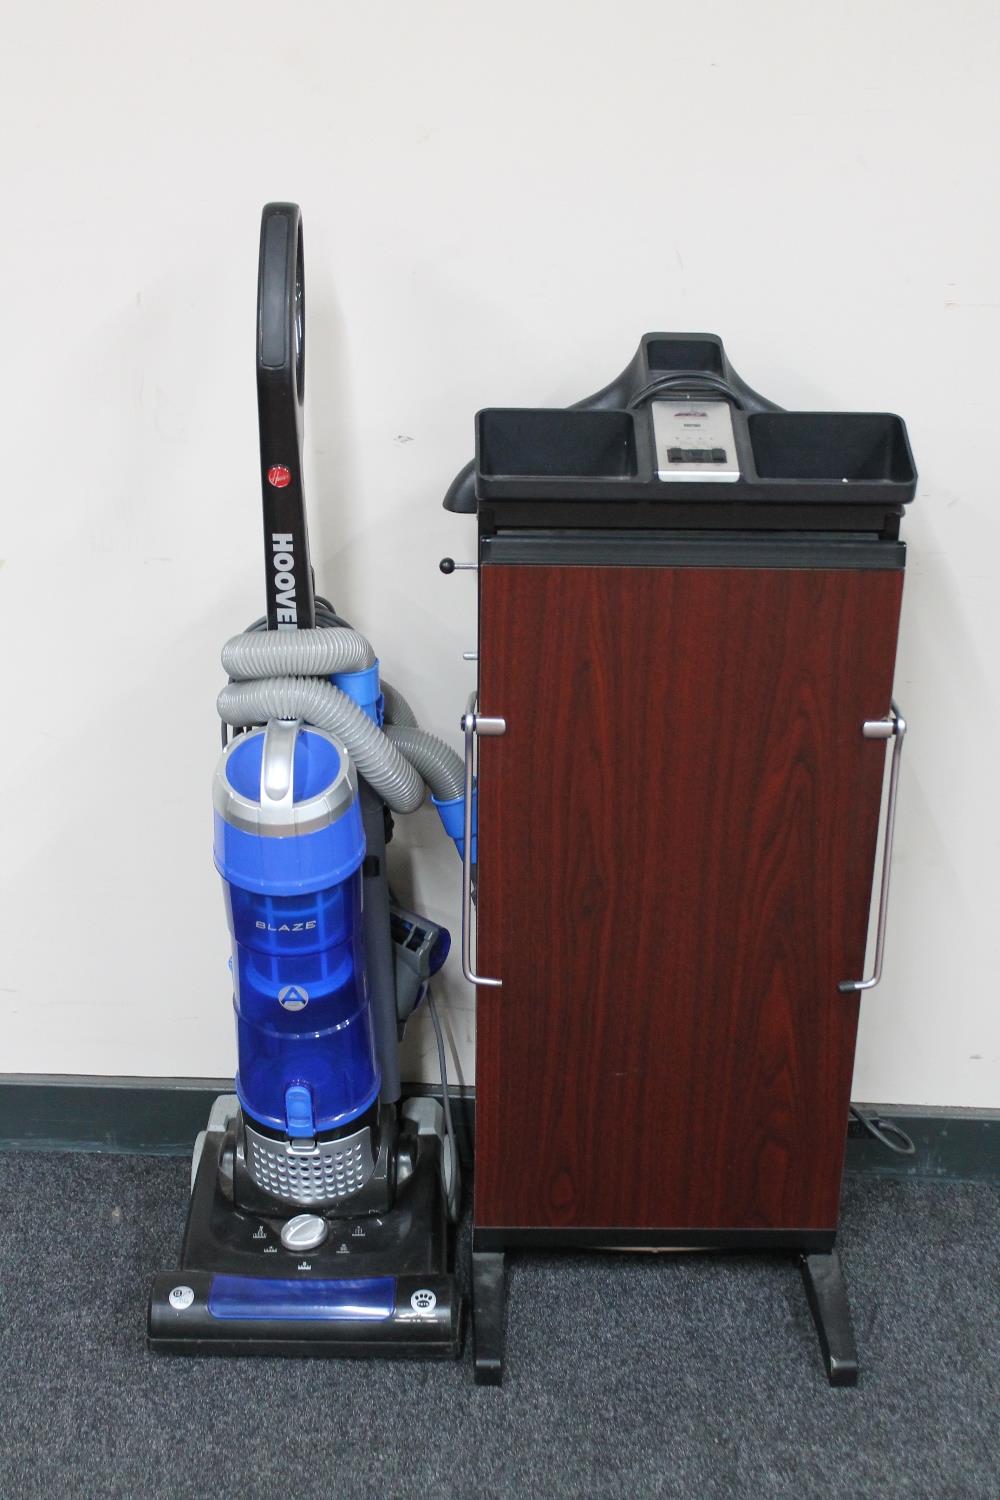 A Hoover Blaze upright vacuum together with a Corby trouser press